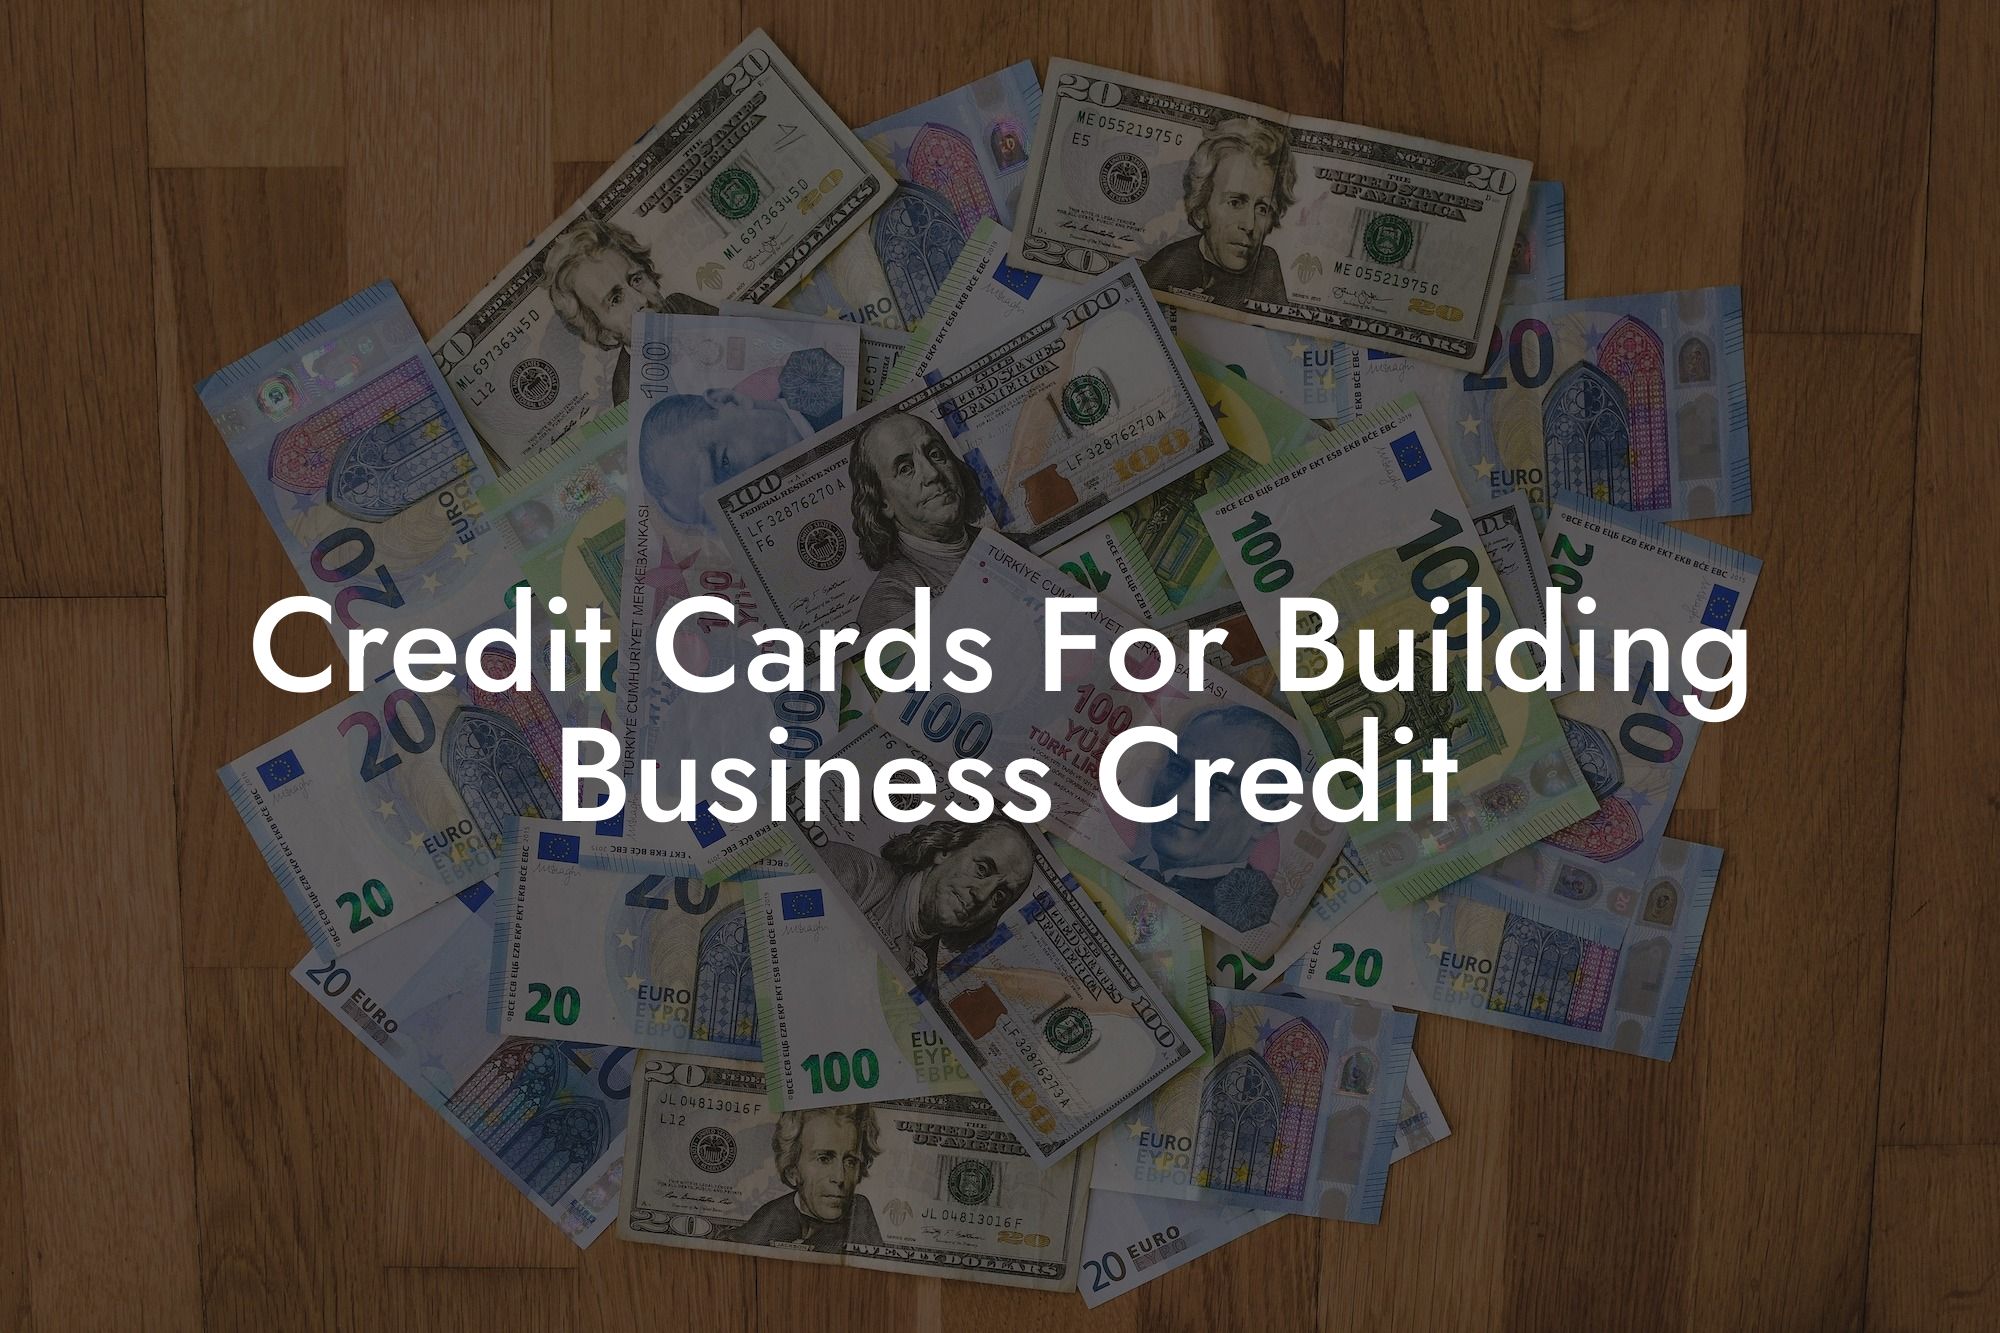 Credit Cards For Building Business Credit